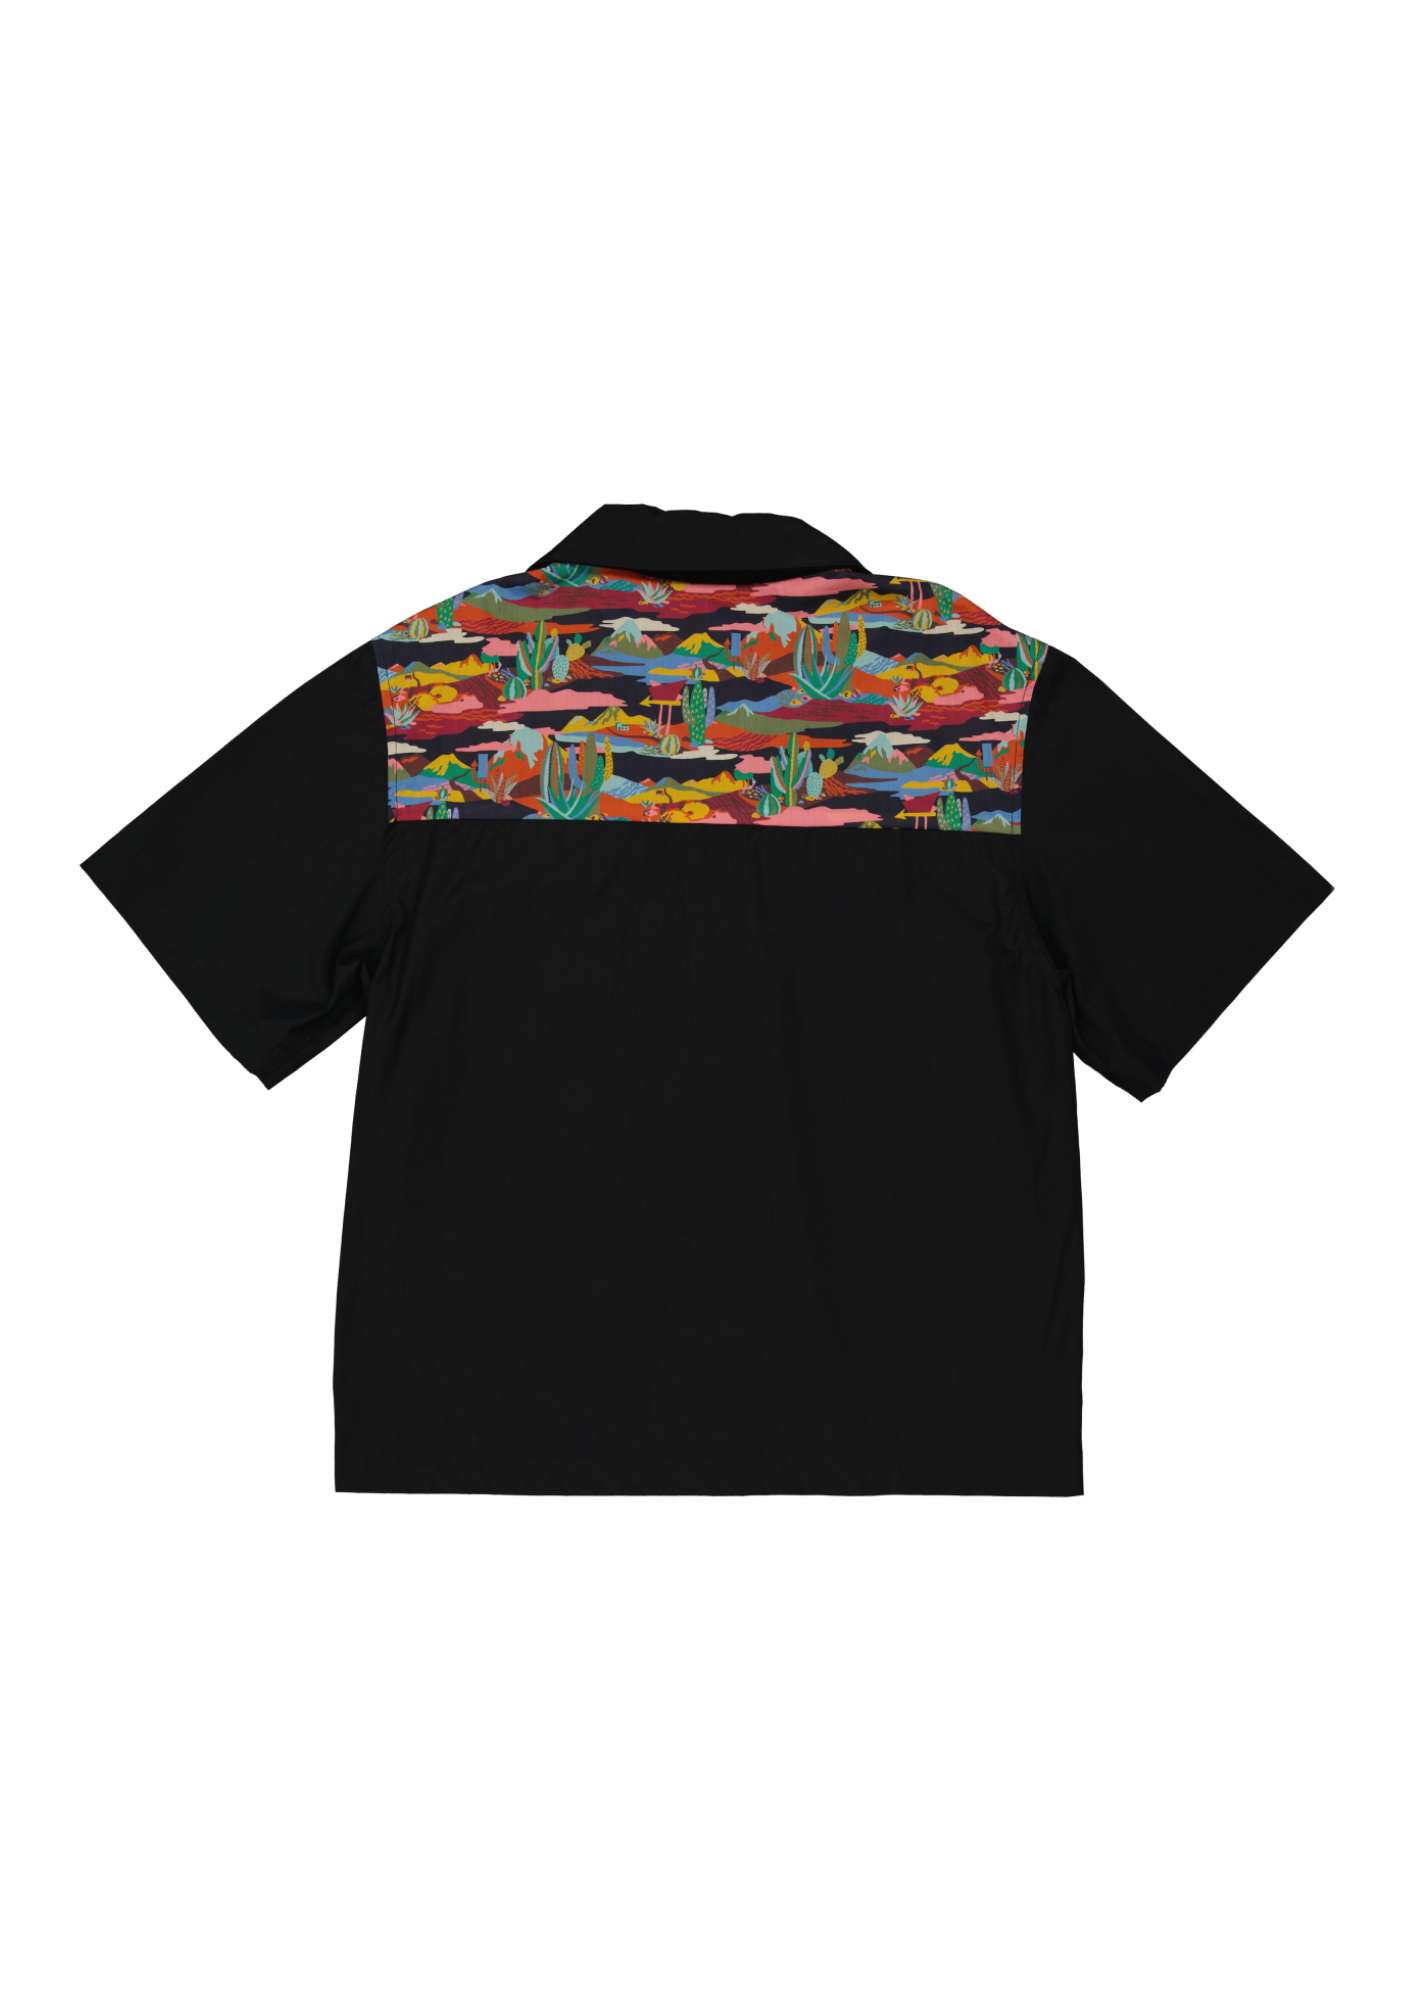 MARJ sustainable streetwear summer shirt in black and psyche print